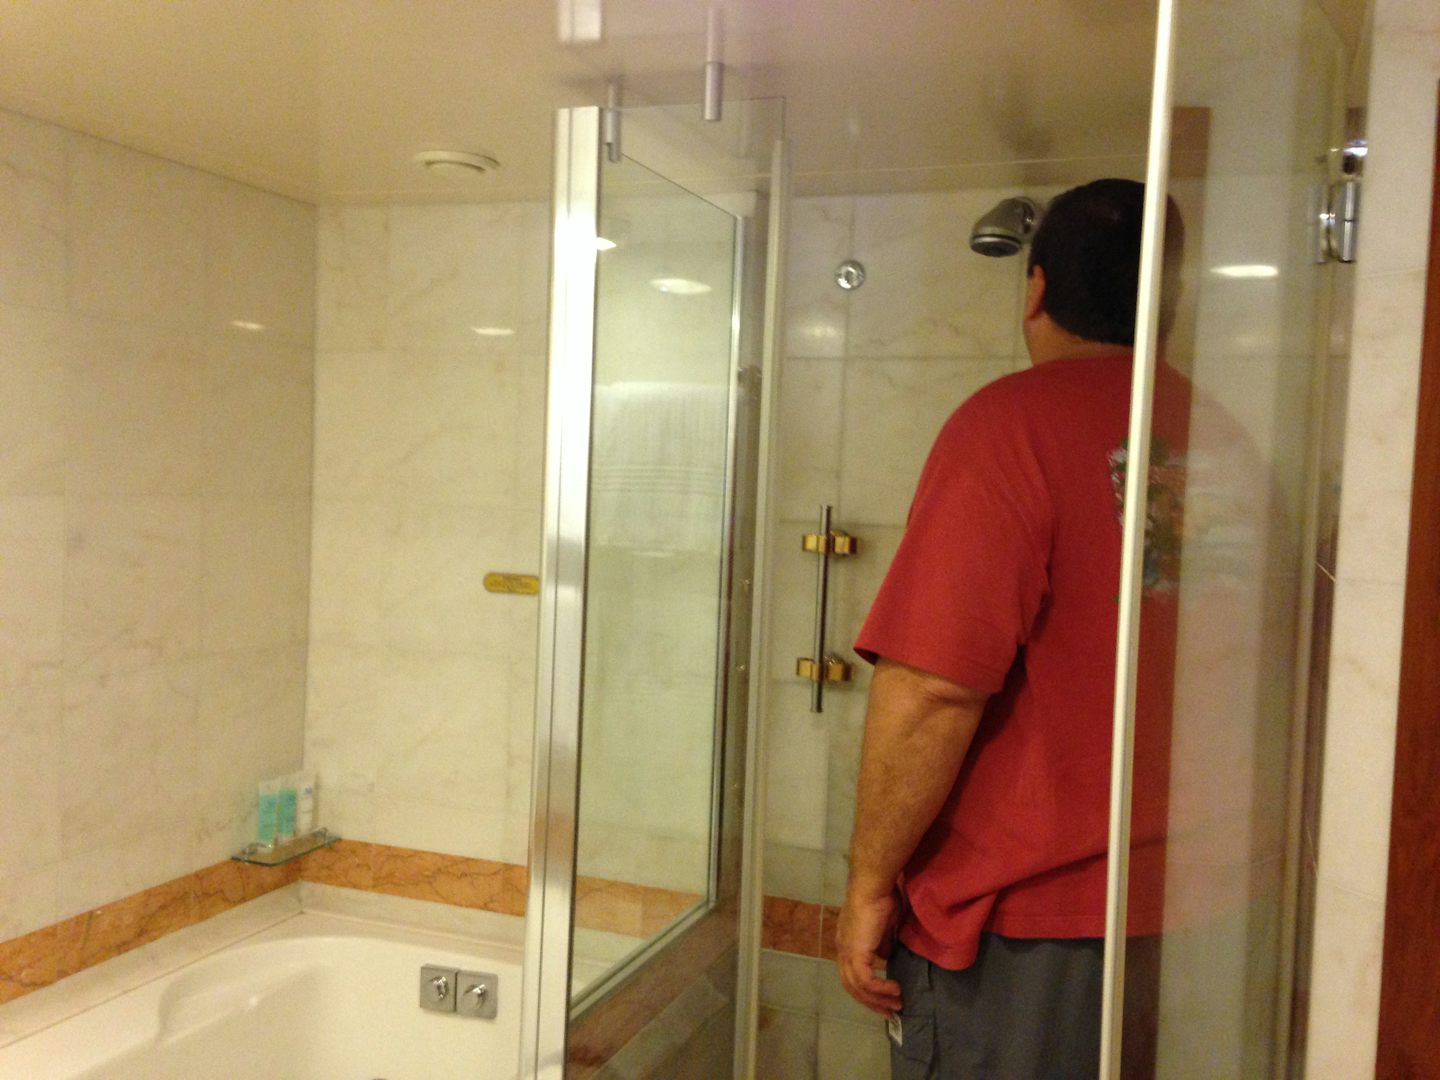 So surprised to see a full size jetted tub and large shower.